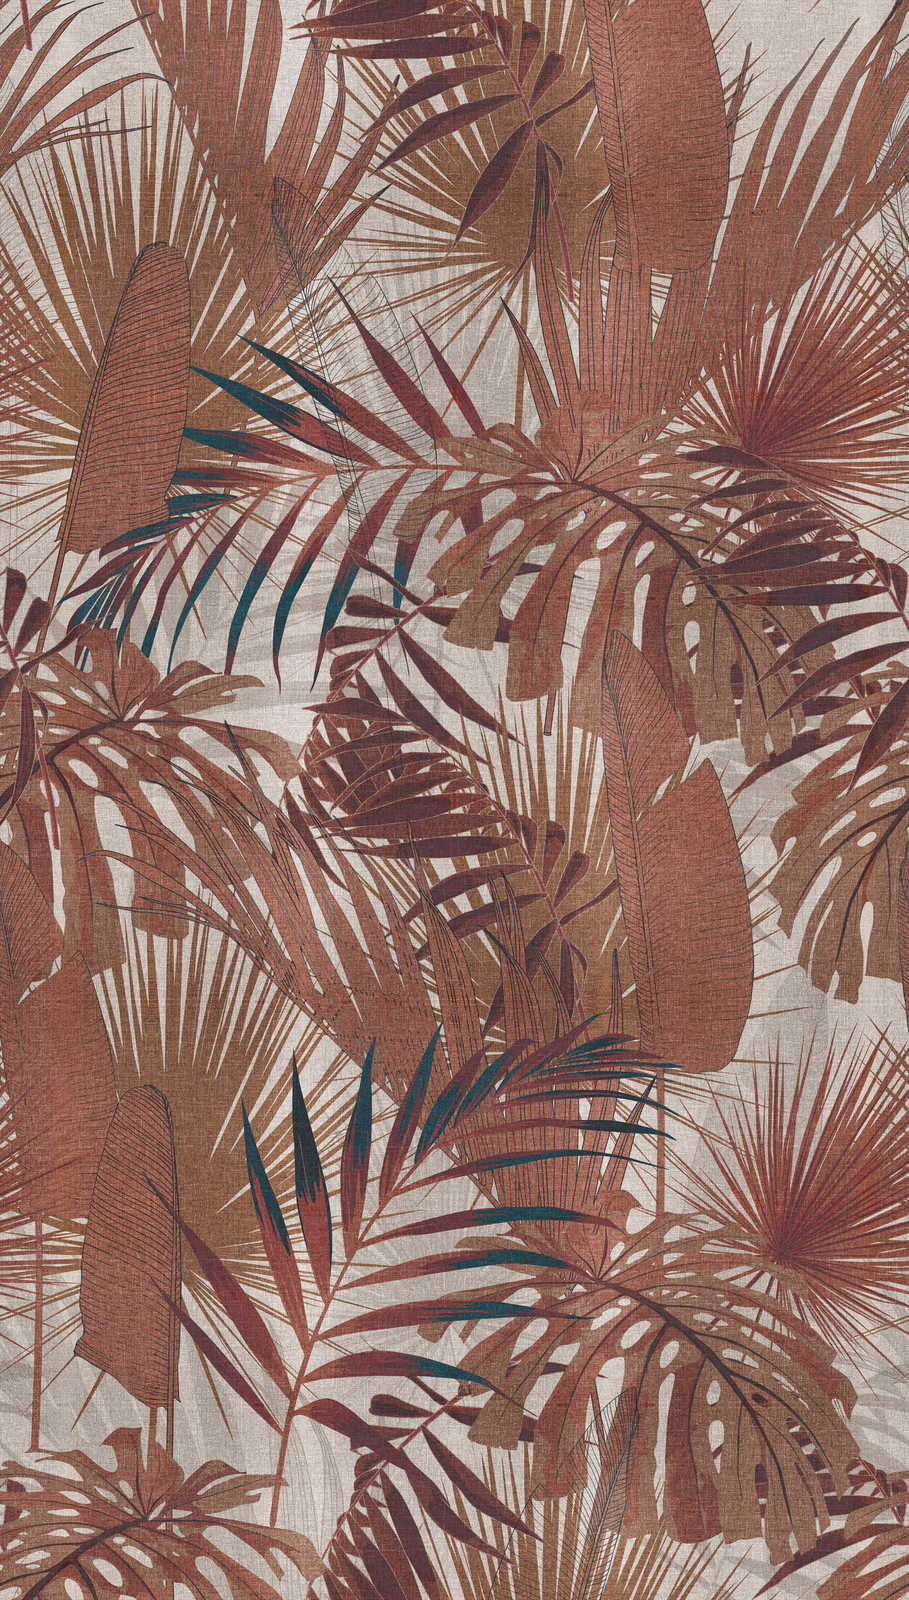             Non-woven wallpaper with jungle leaves motif - reddish brown, beige
        